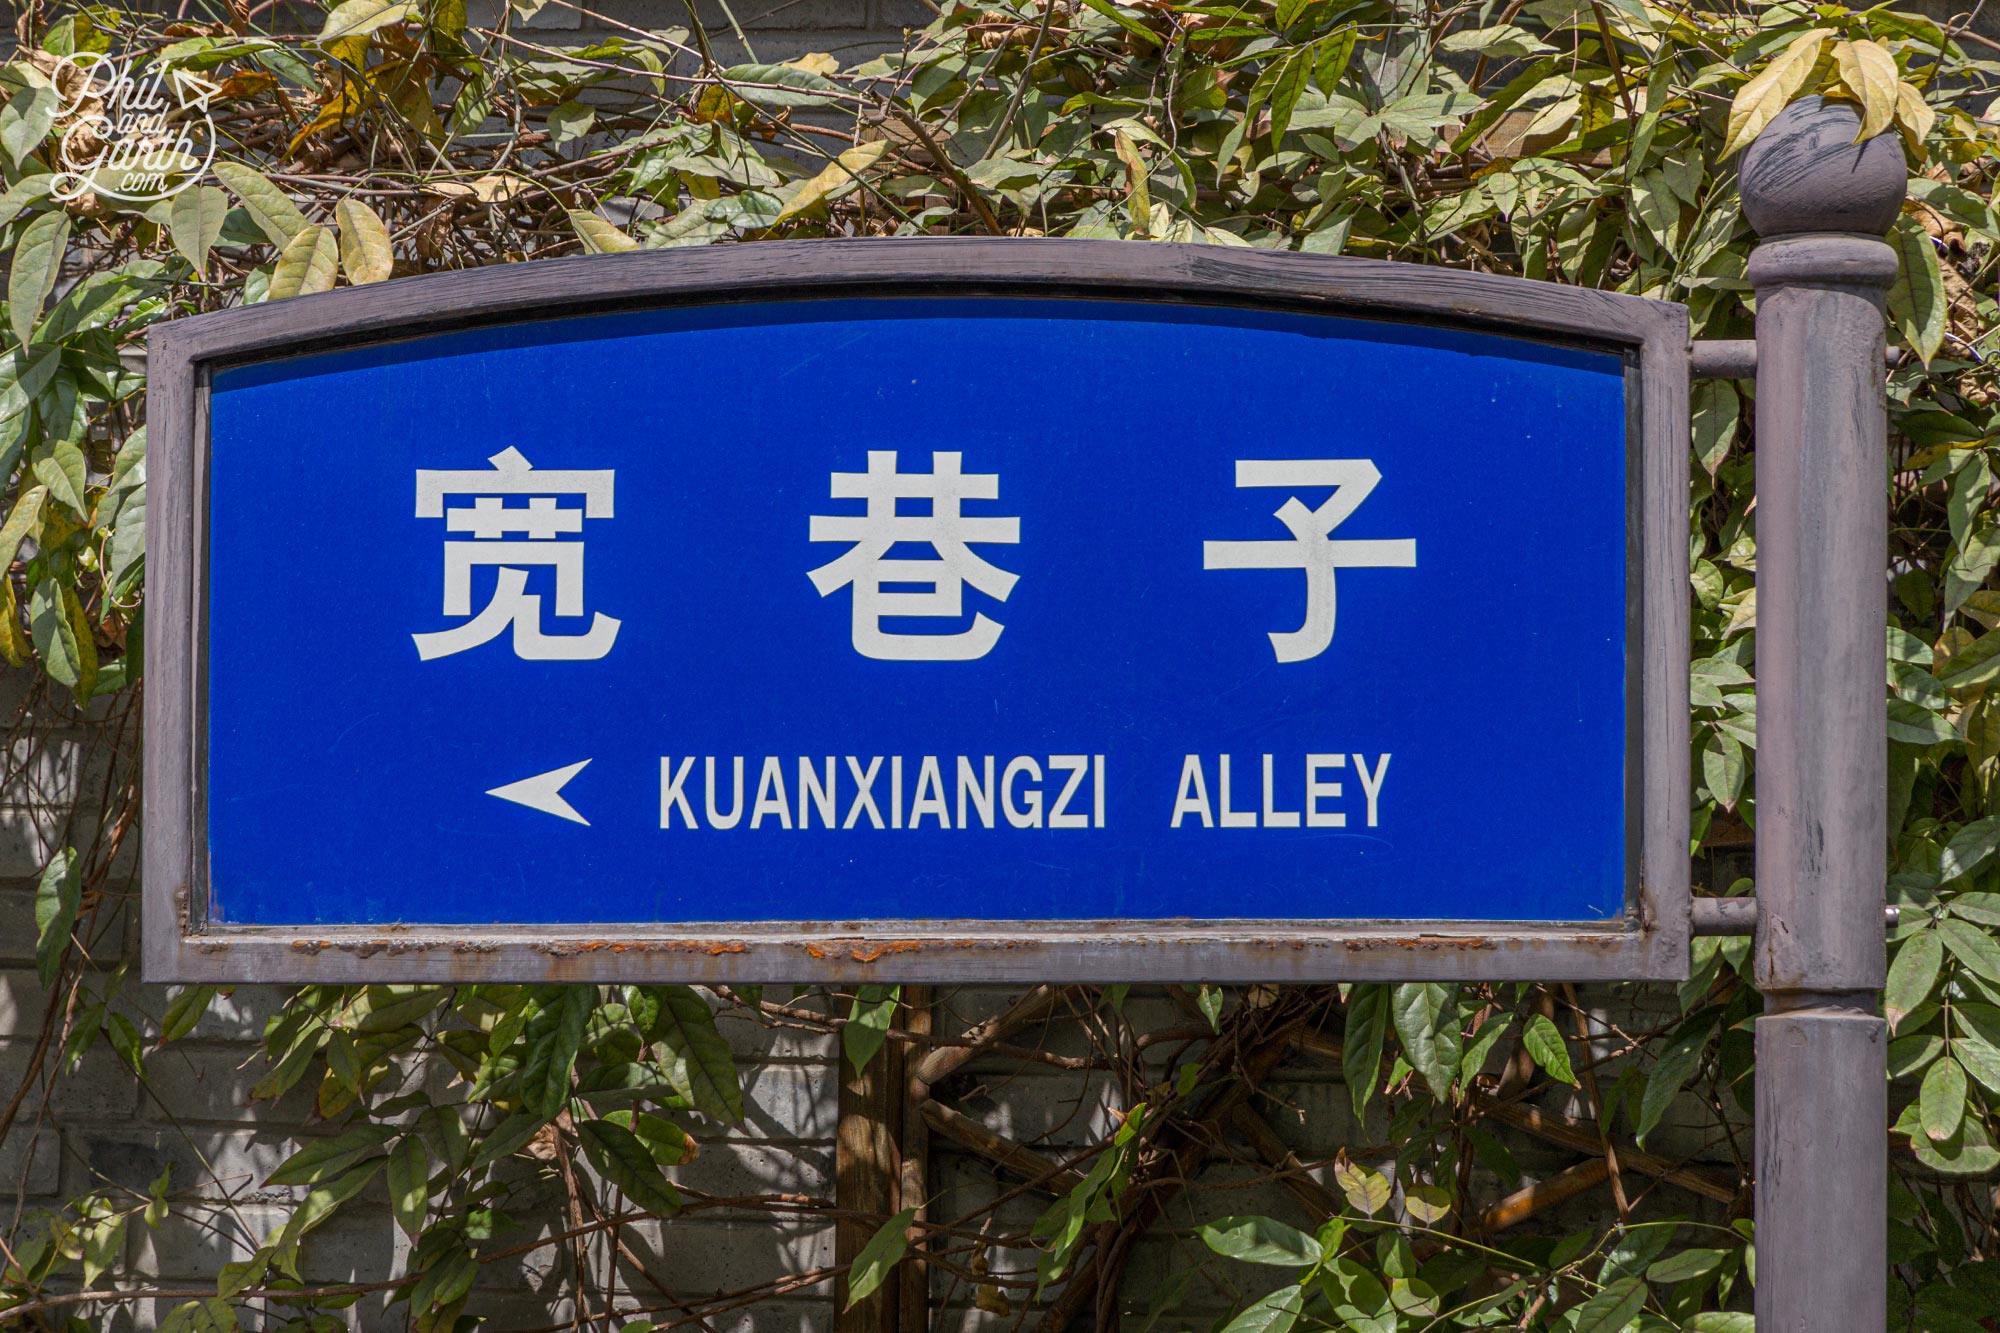 A sign pointing to Kuan Xiangzi Alley Sign. It translates as 'Wide Alley' Chengdu China